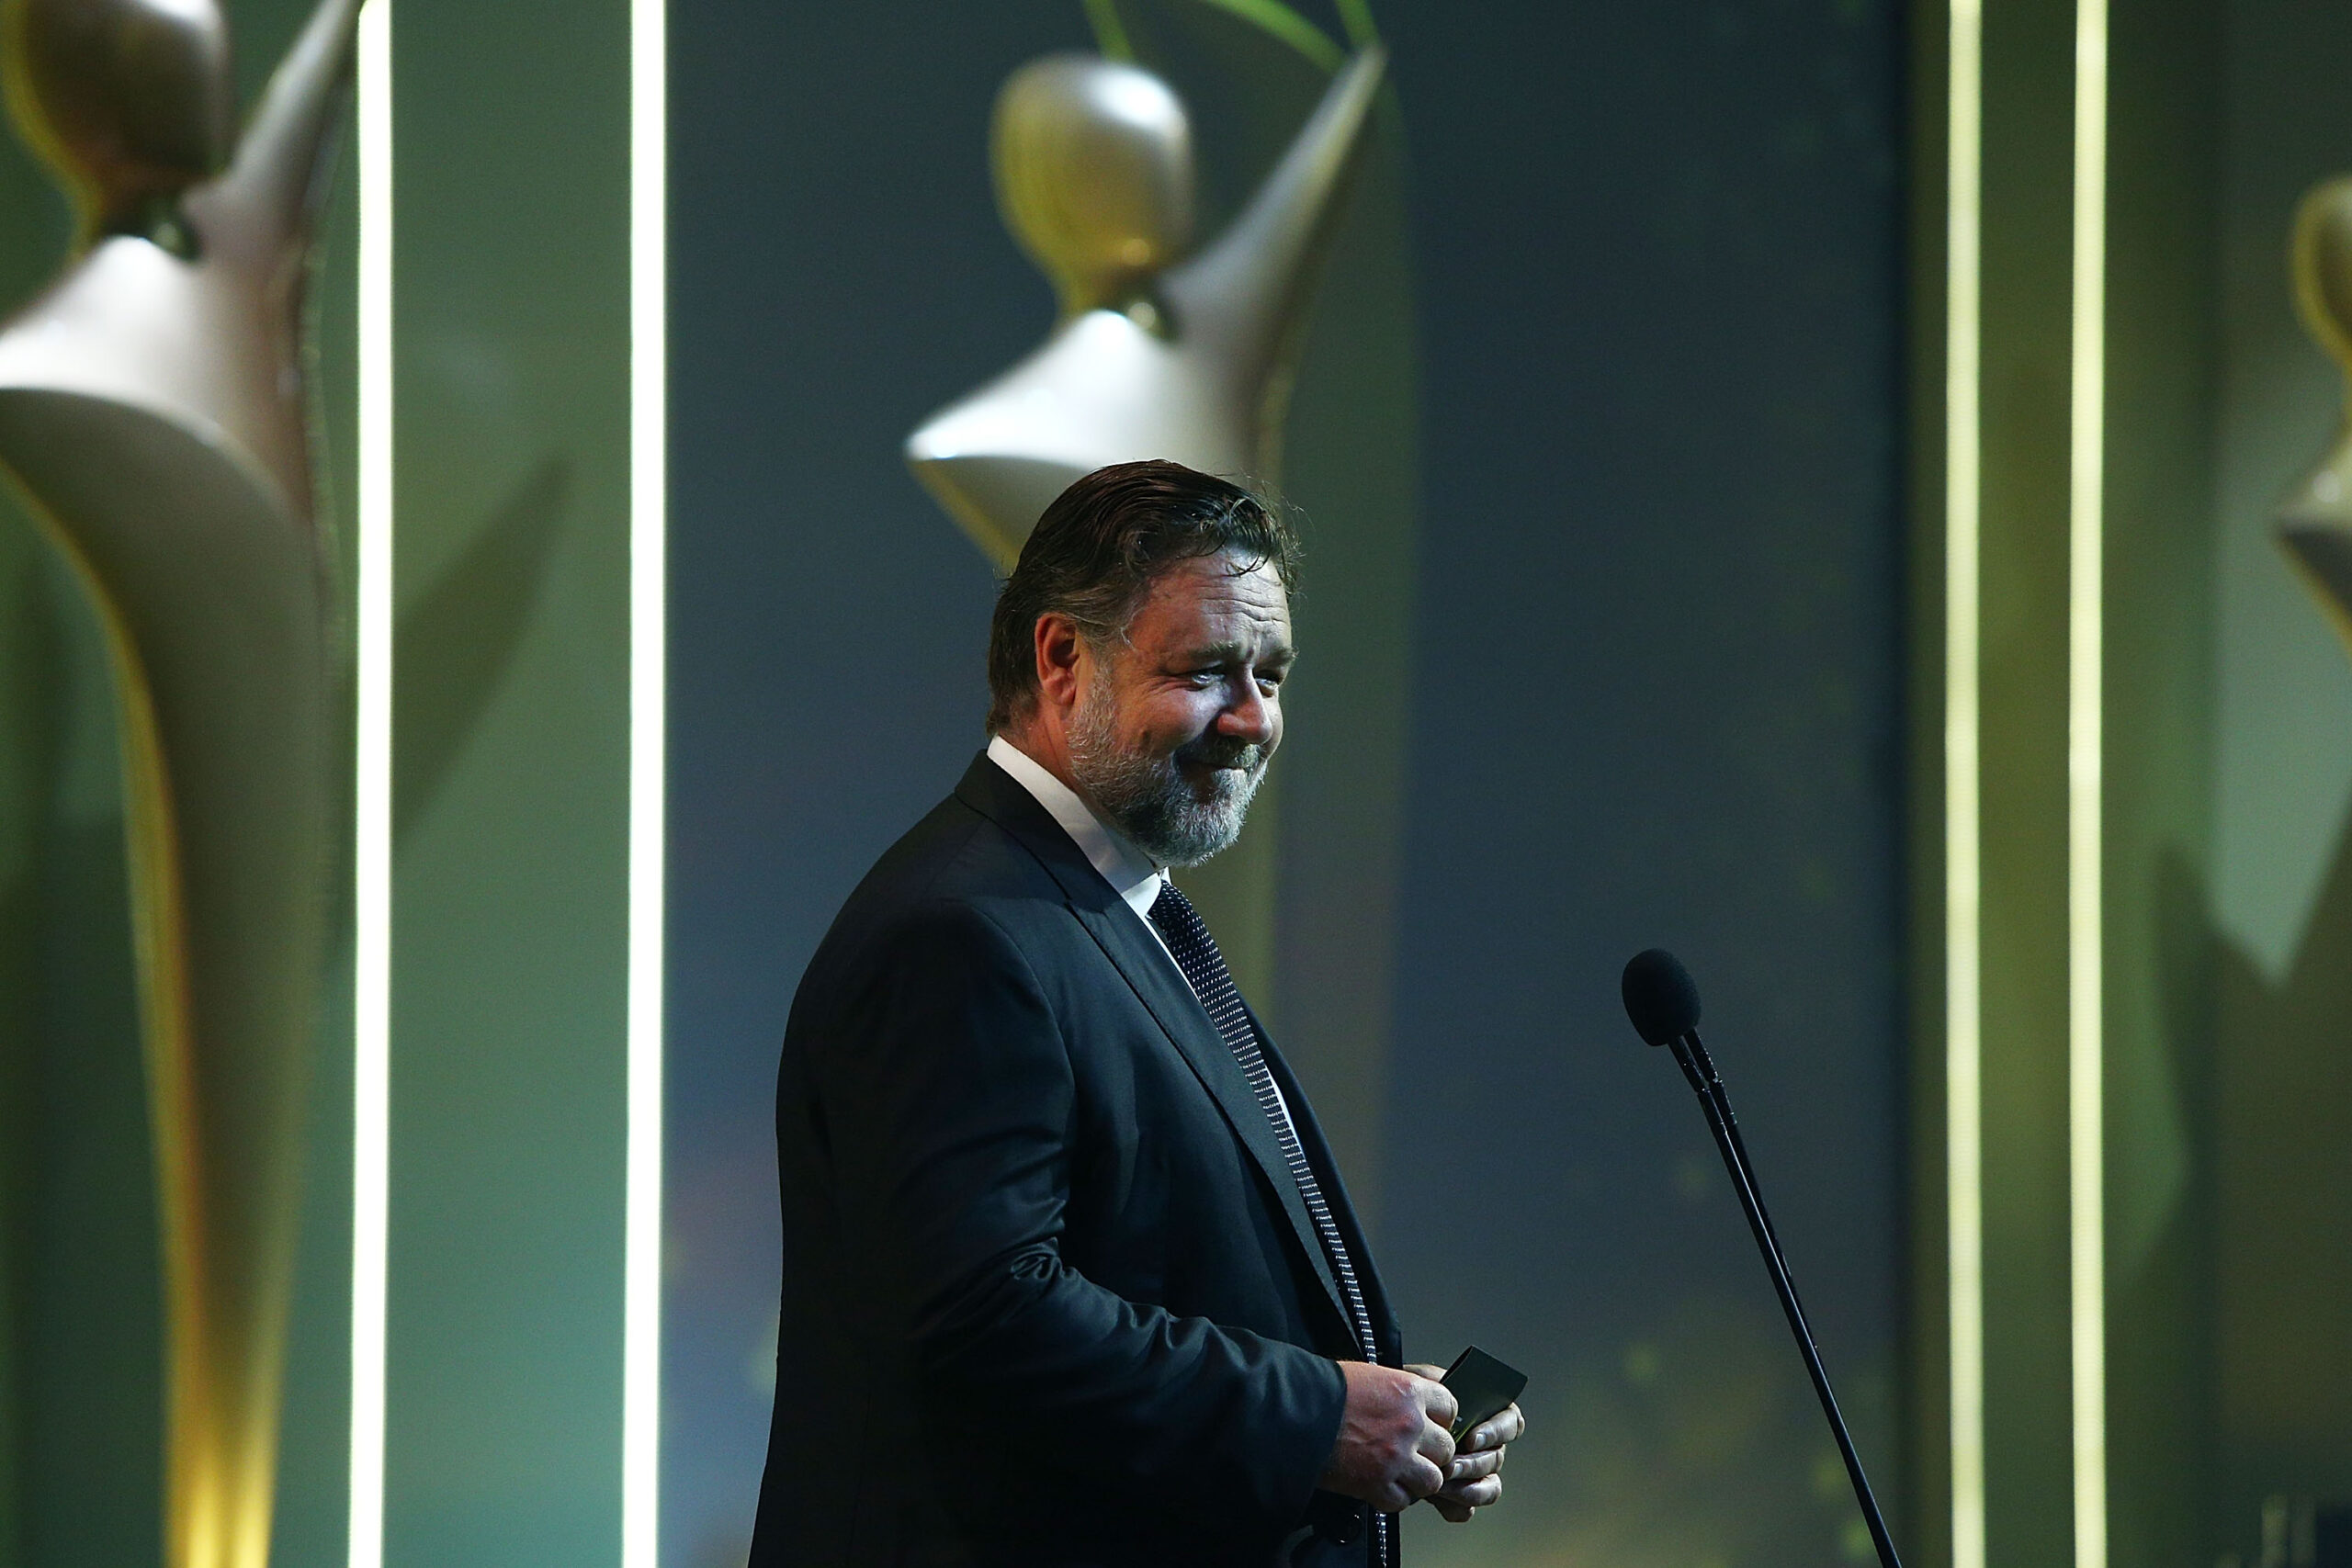 Russell Crowe holds an ‘Art of Divorce’ auction